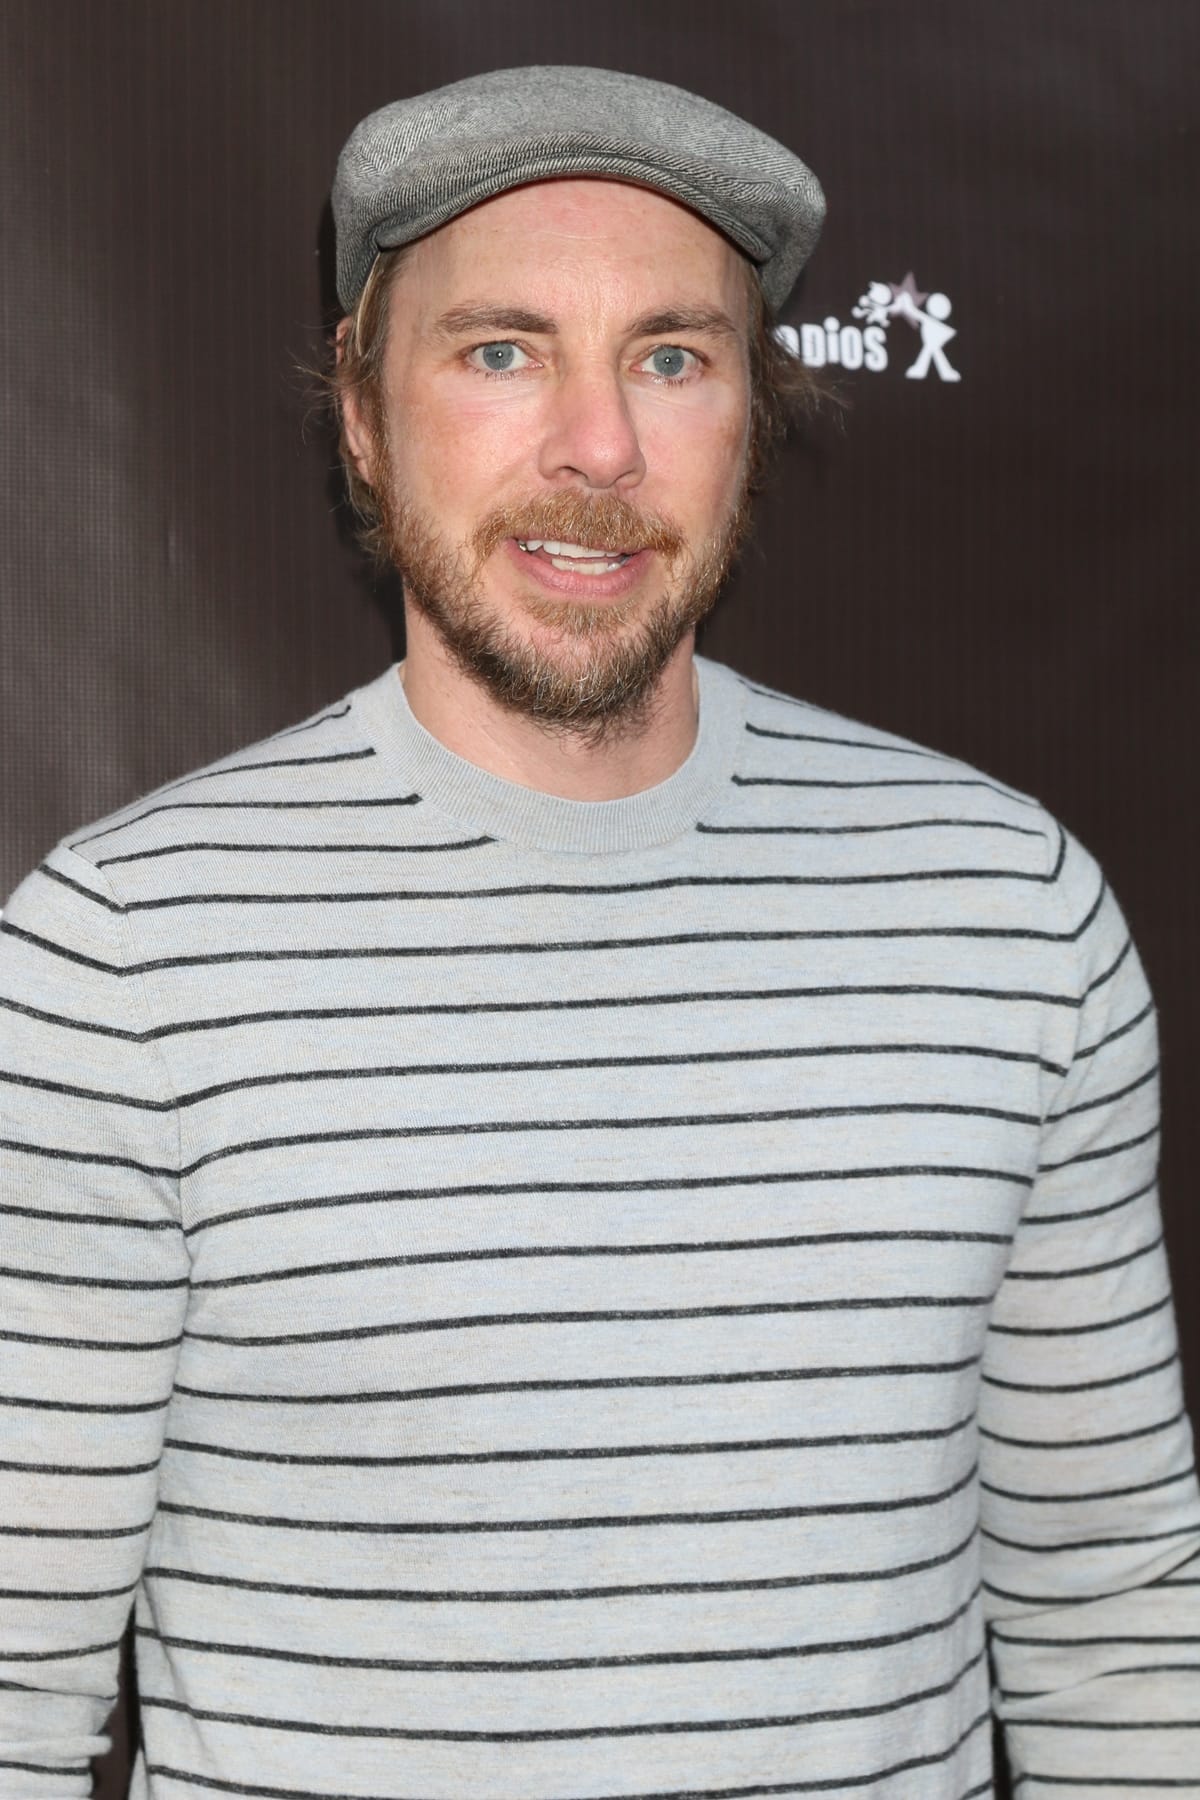 Dax Shepard started using drugs and drinking alcohol in high school and relapsed in 2020 after 16 years of sobriety